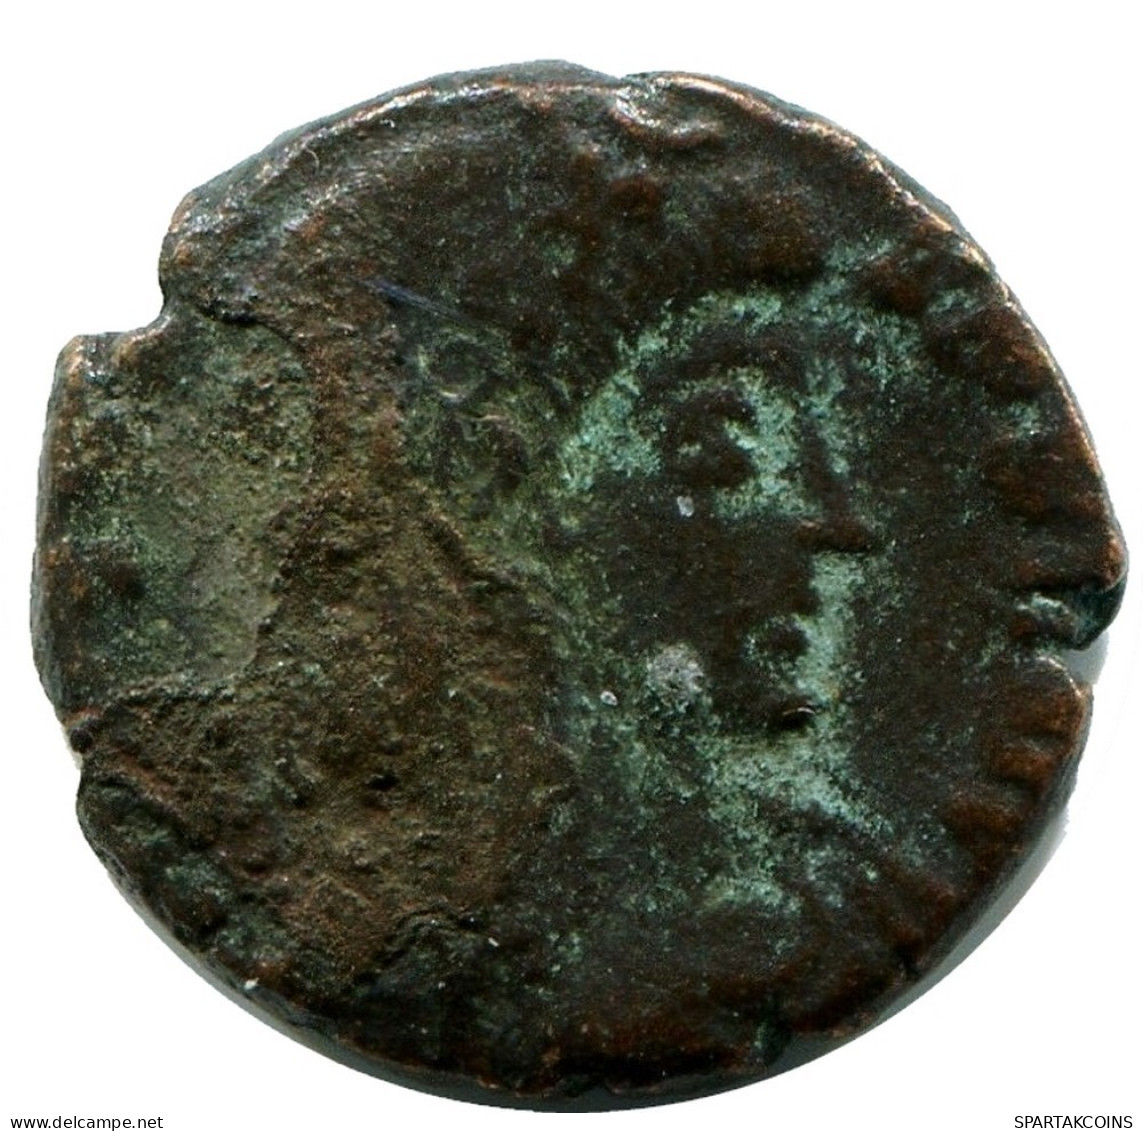 CONSTANS MINTED IN ROME ITALY FROM THE ROYAL ONTARIO MUSEUM #ANC11508.14.U.A - The Christian Empire (307 AD Tot 363 AD)